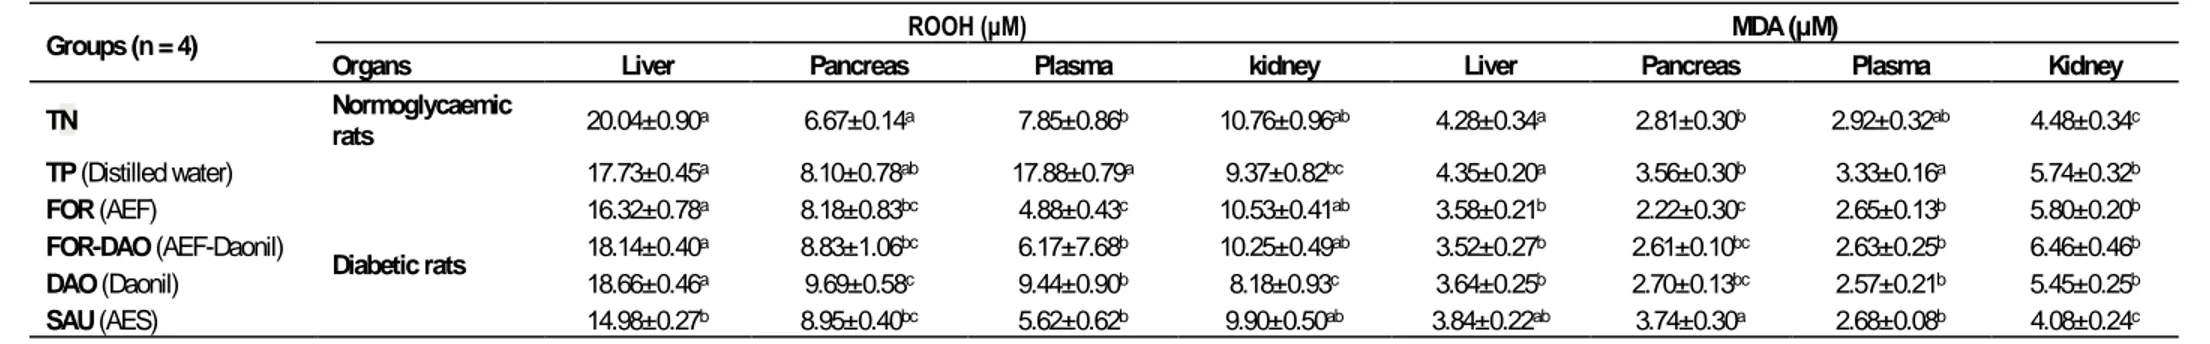 Table 8. Effects of the oral administration of AEF on hydroperoxide (ROOH) and malondialdehyde (MDA) contents of different organ homogenates and plasma